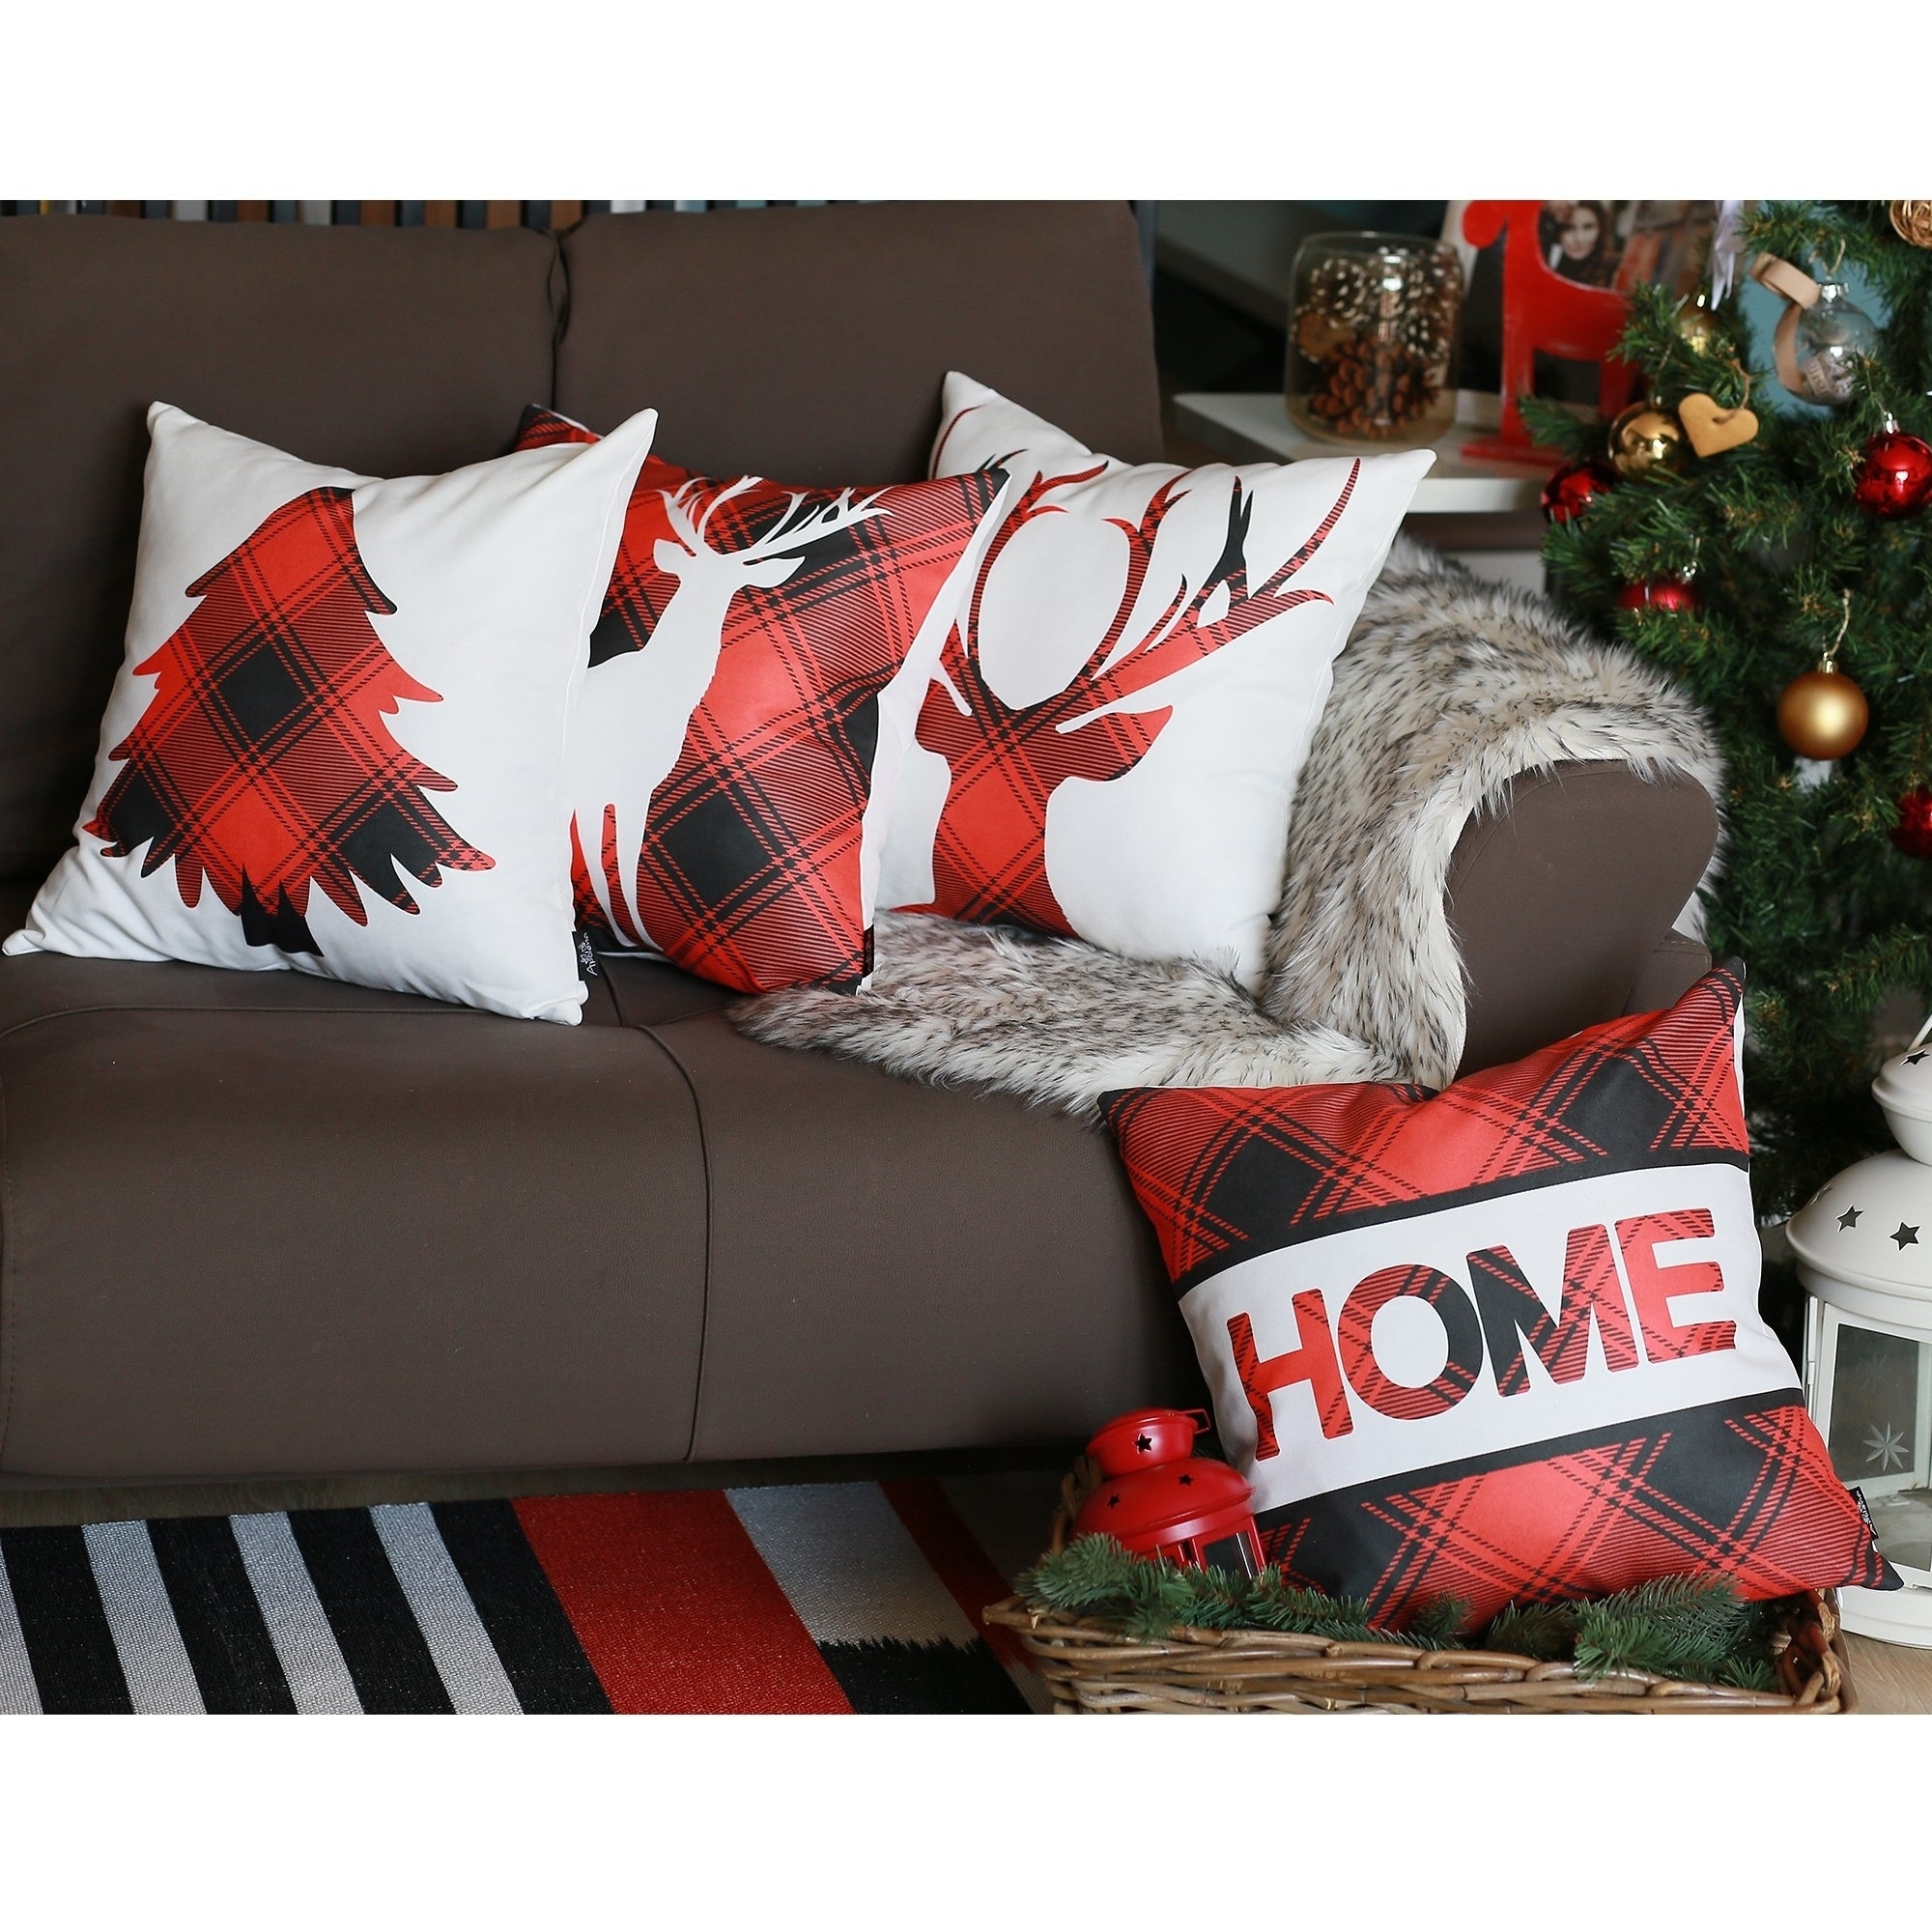 https://ak1.ostkcdn.com/images/products/29348573/Merry-Christmas-Set-of-4-Throw-Pillow-Covers-Christmas-Gift-18-x18-ff6d35a4-e4f6-4485-9709-a873546ca070.jpg